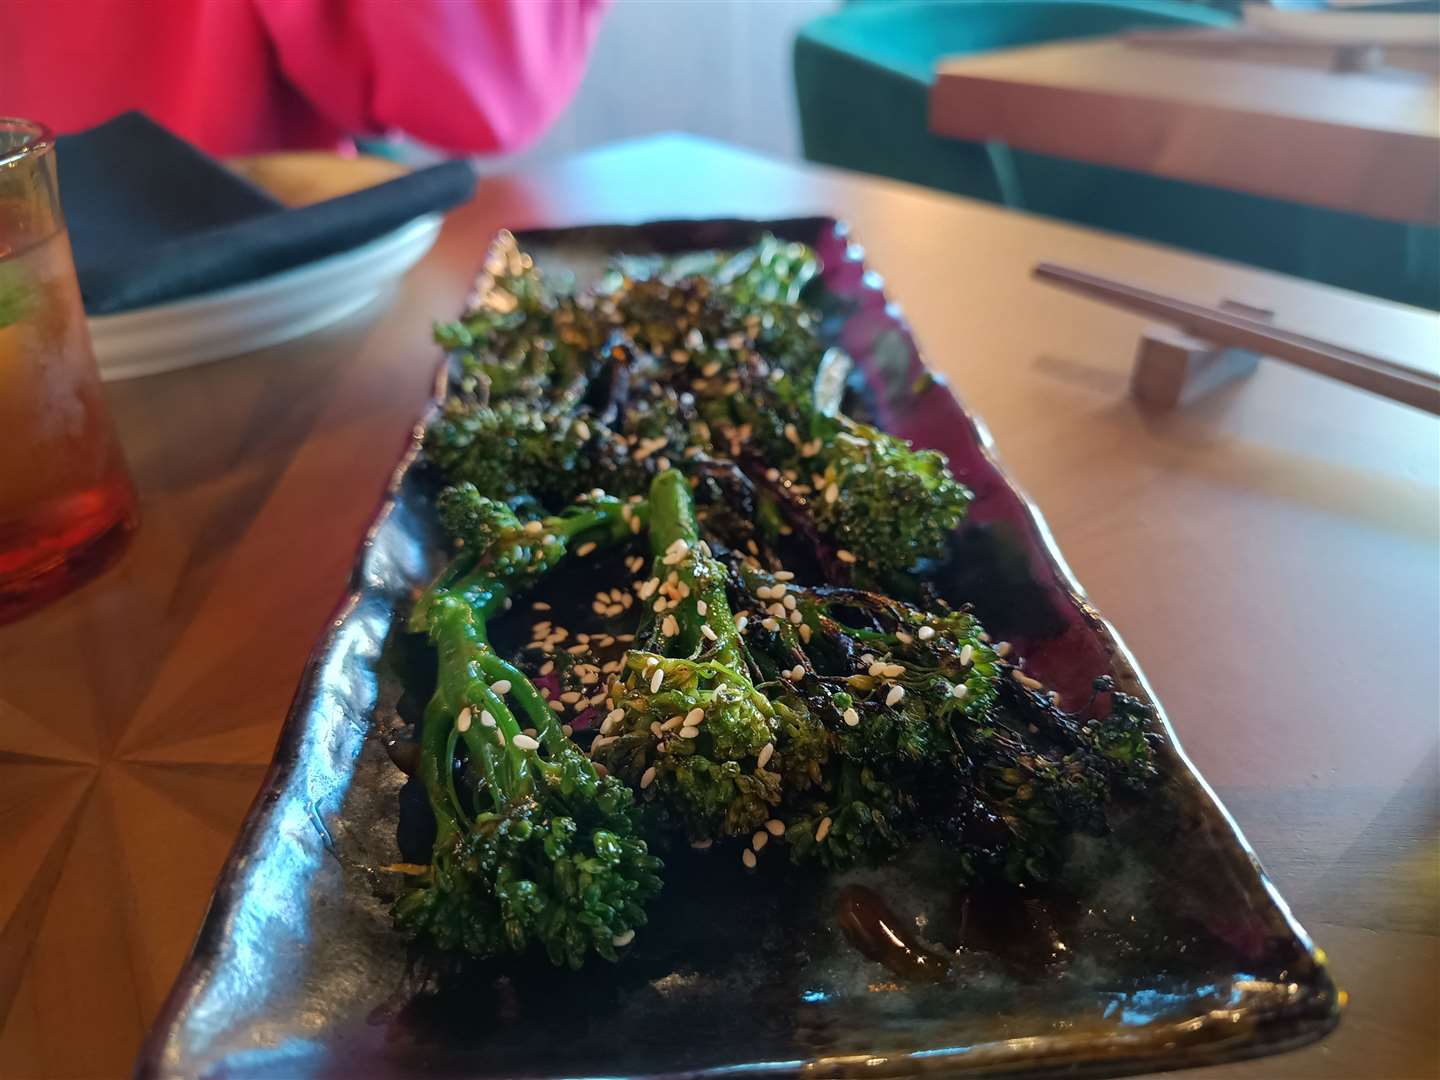 The tenderstem broccoli was my favourite dish of the night